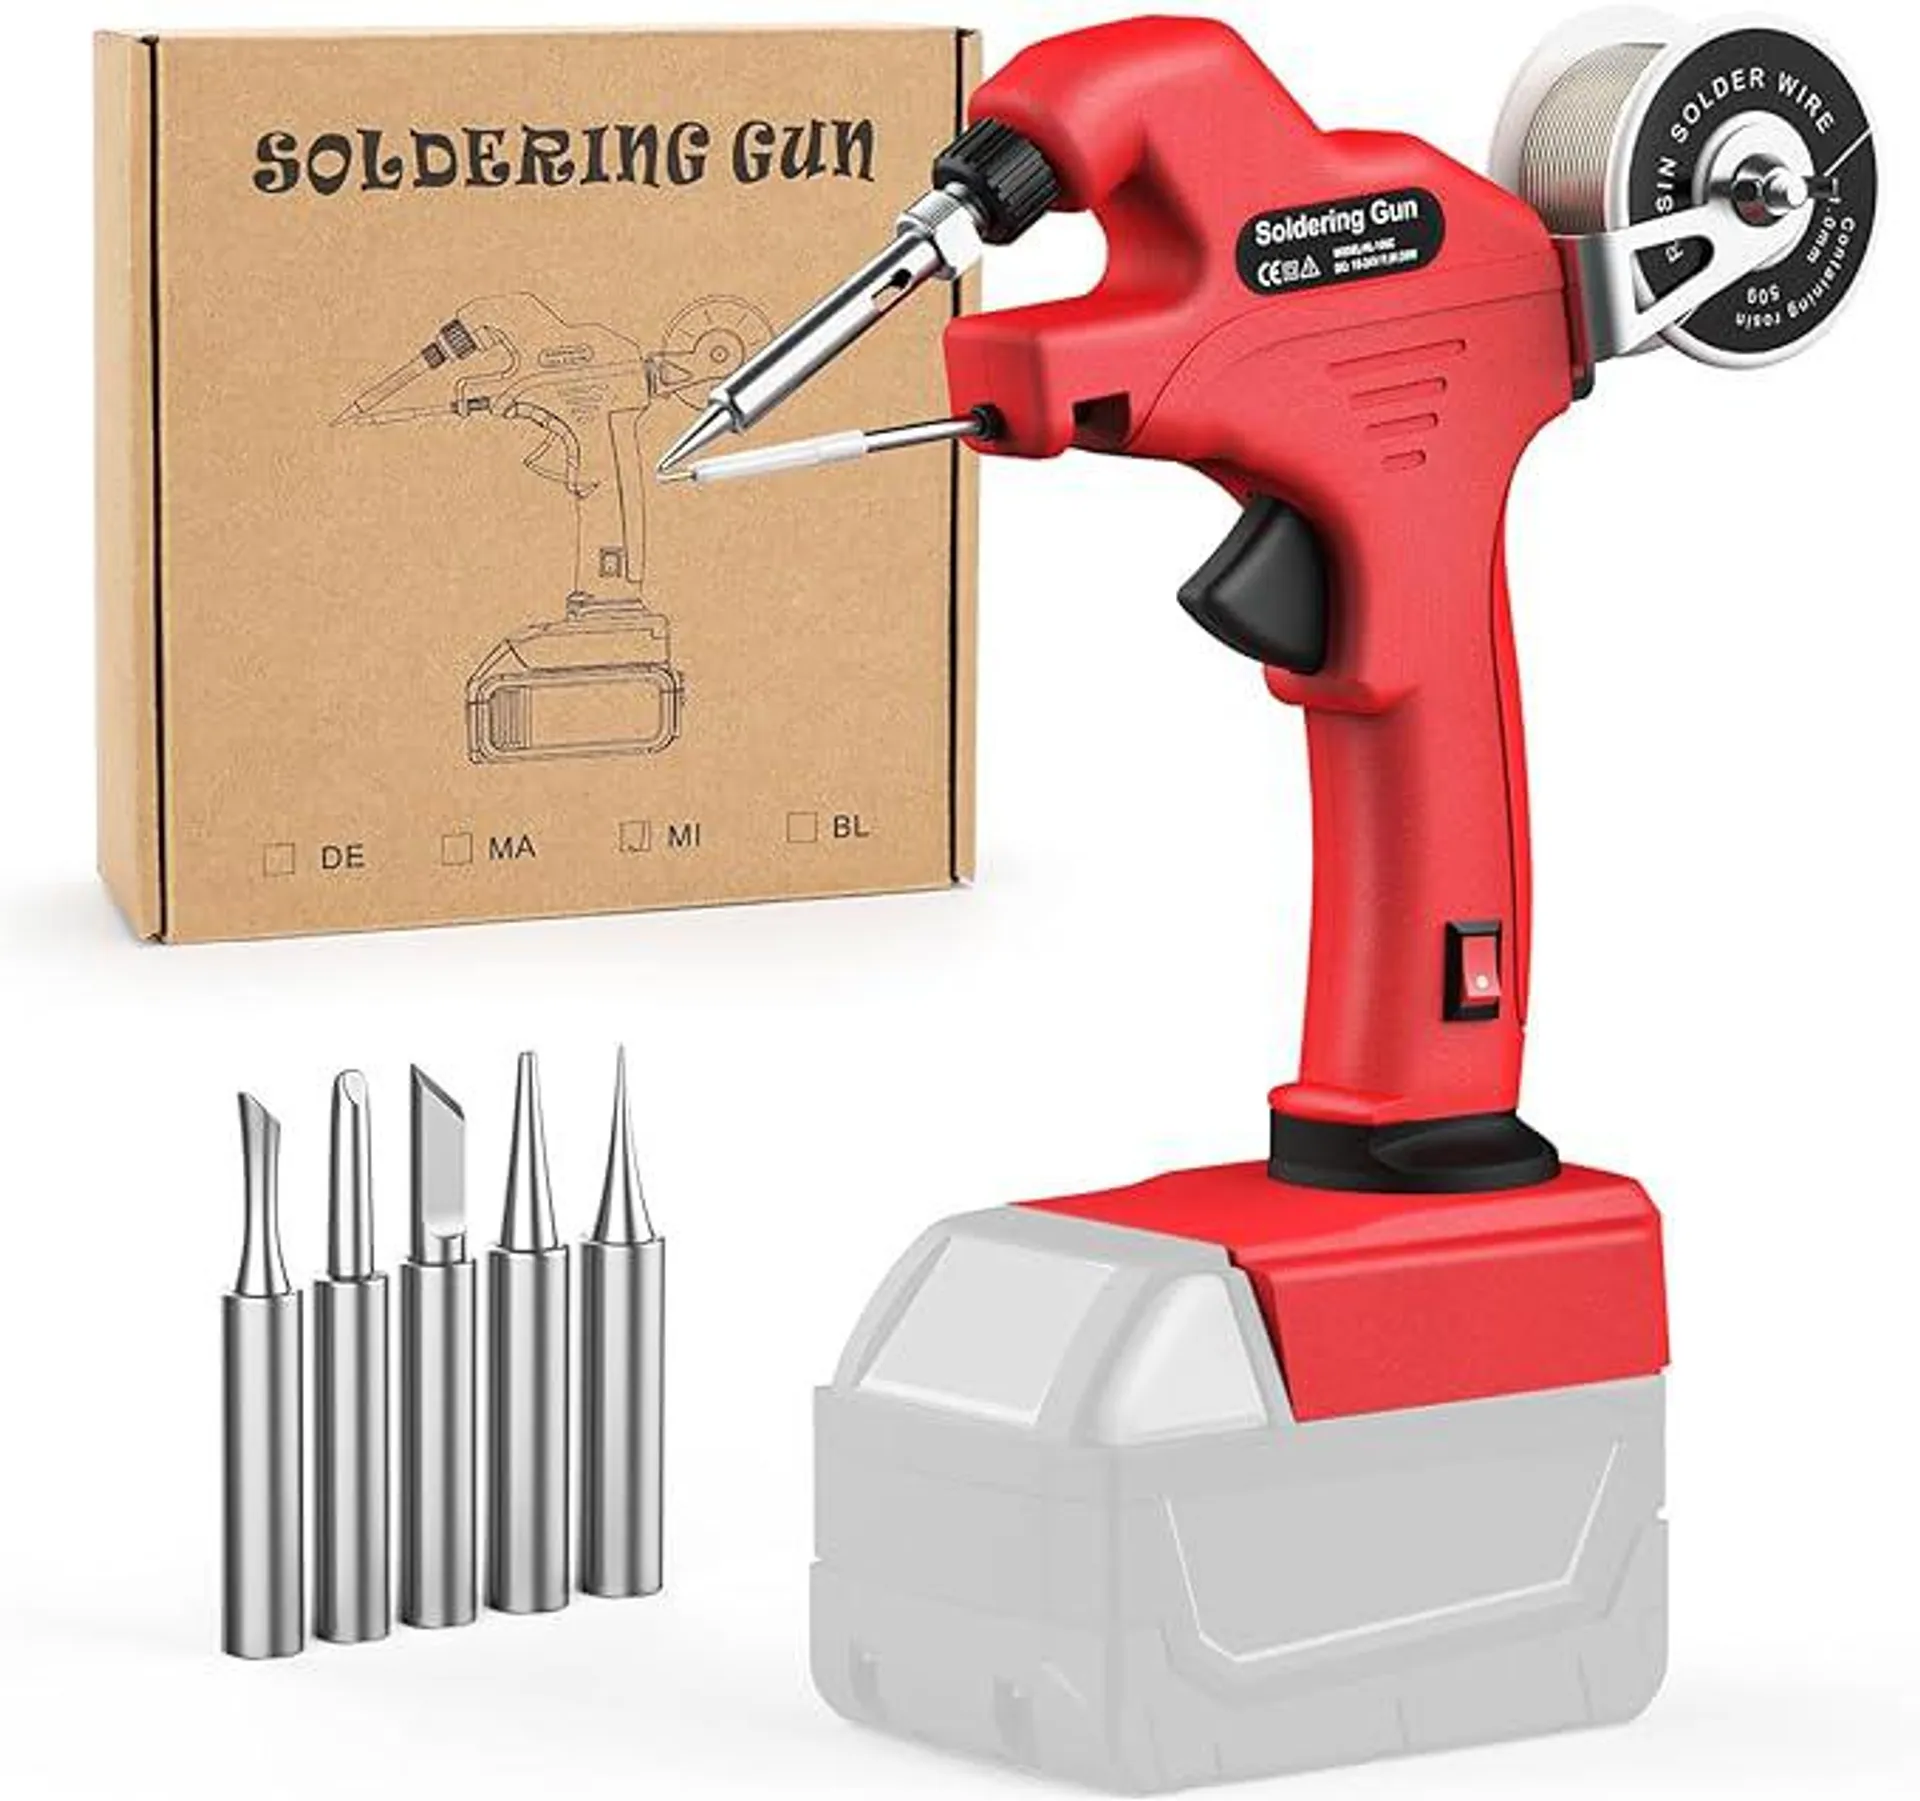 Cordless Soldering Iron for Milwaukee 18v Battery, 30W Automatic Feed One Hand-held Soldering Welding Gun Kit with 50g 0.04’’ Solder Wire & 5pcs Solder Tips for Electronics, Jewelry Making, Repairing